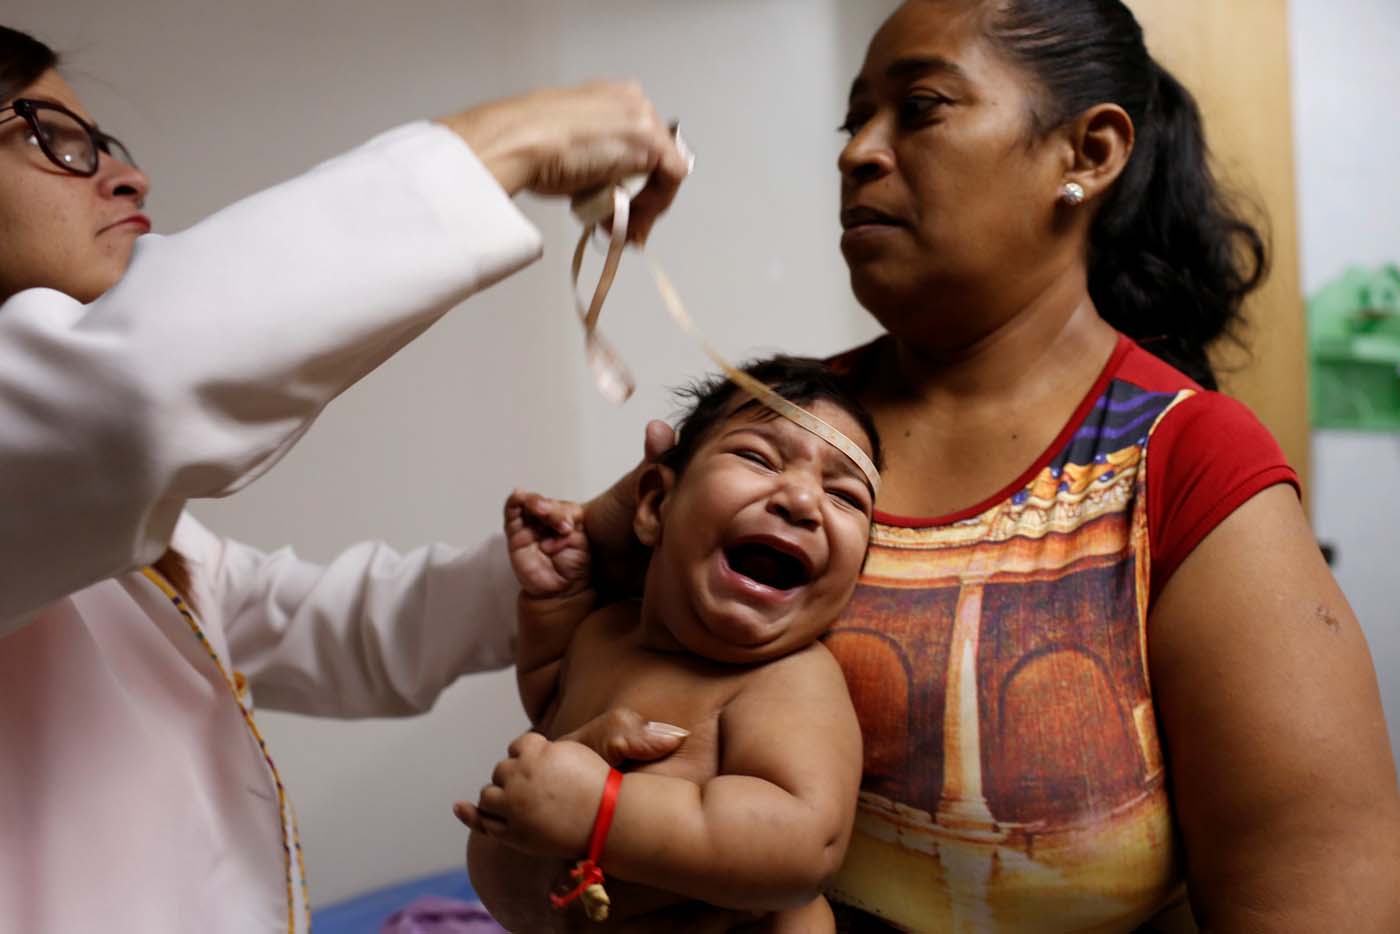 Iberis Vargas (R), holds her 7-month-old daughter, Geovelis Ramos, a neurological patient being treated with anticonvulsants, while an specialist examines her in a clinic in La Guaira, Venezuela February 4, 2017. REUTERS/Carlos Garcia Rawlins    SEARCH "EPILEPSY CARACAS" FOR THIS STORY. SEARCH "WIDER IMAGE" FOR ALL STORIES.